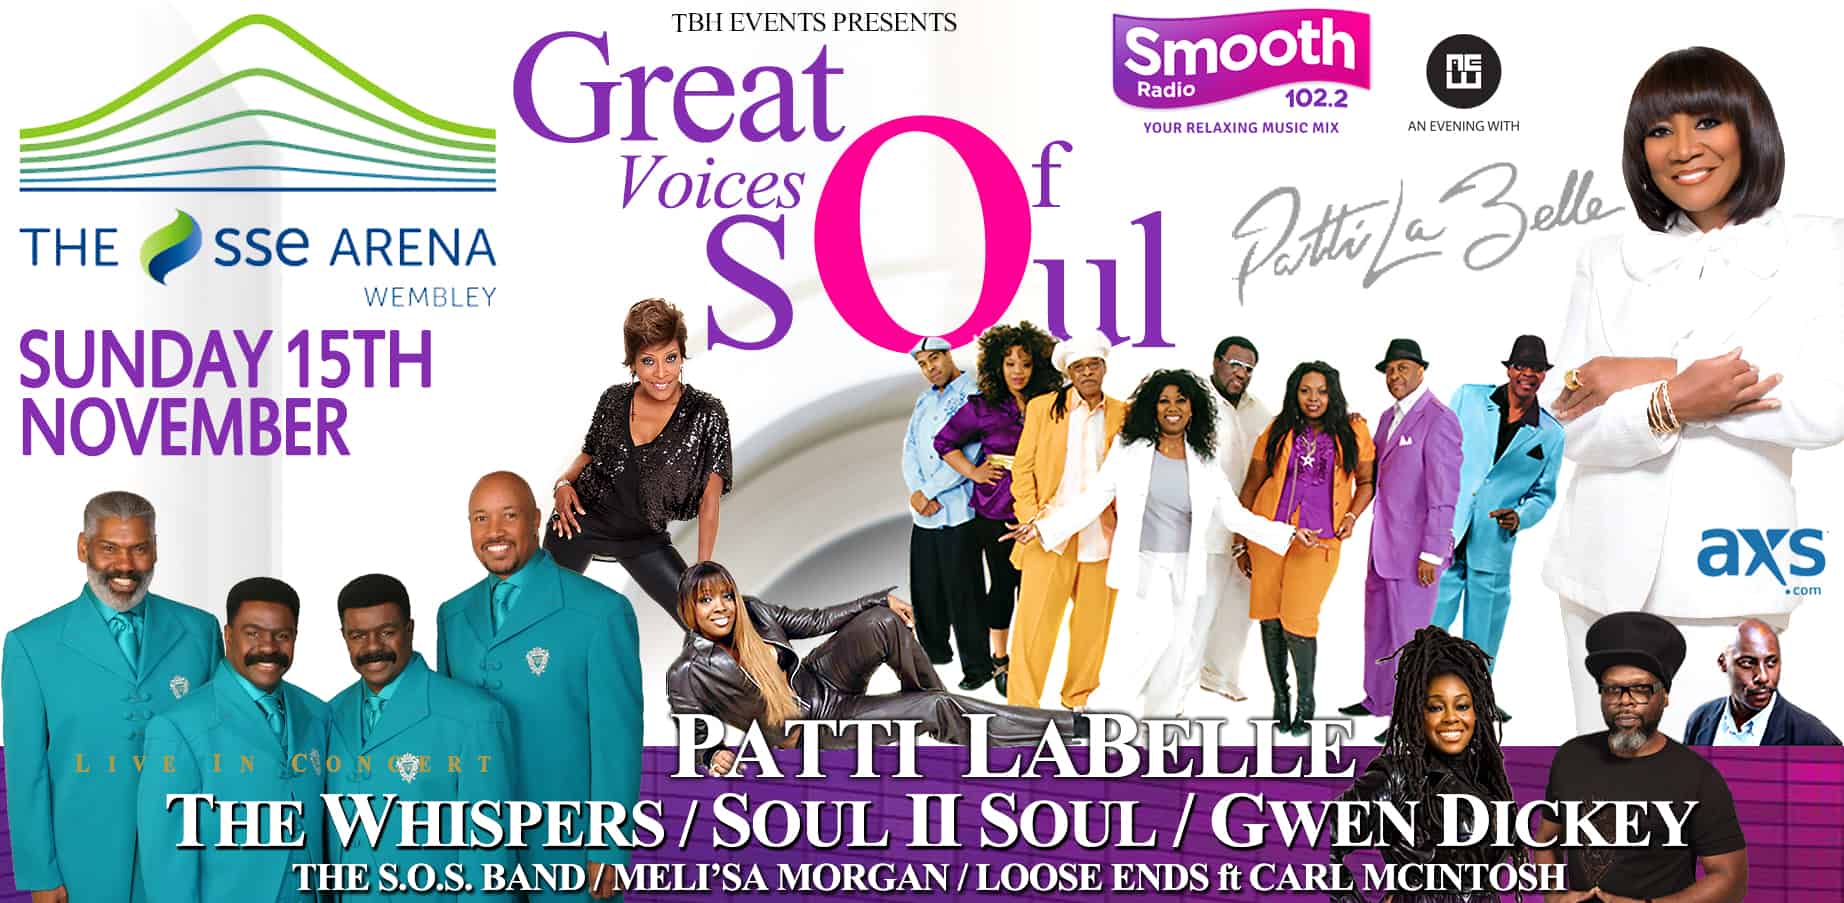 Smooth Radio. Great Voice. Patti Labelle CD albums. Great voices